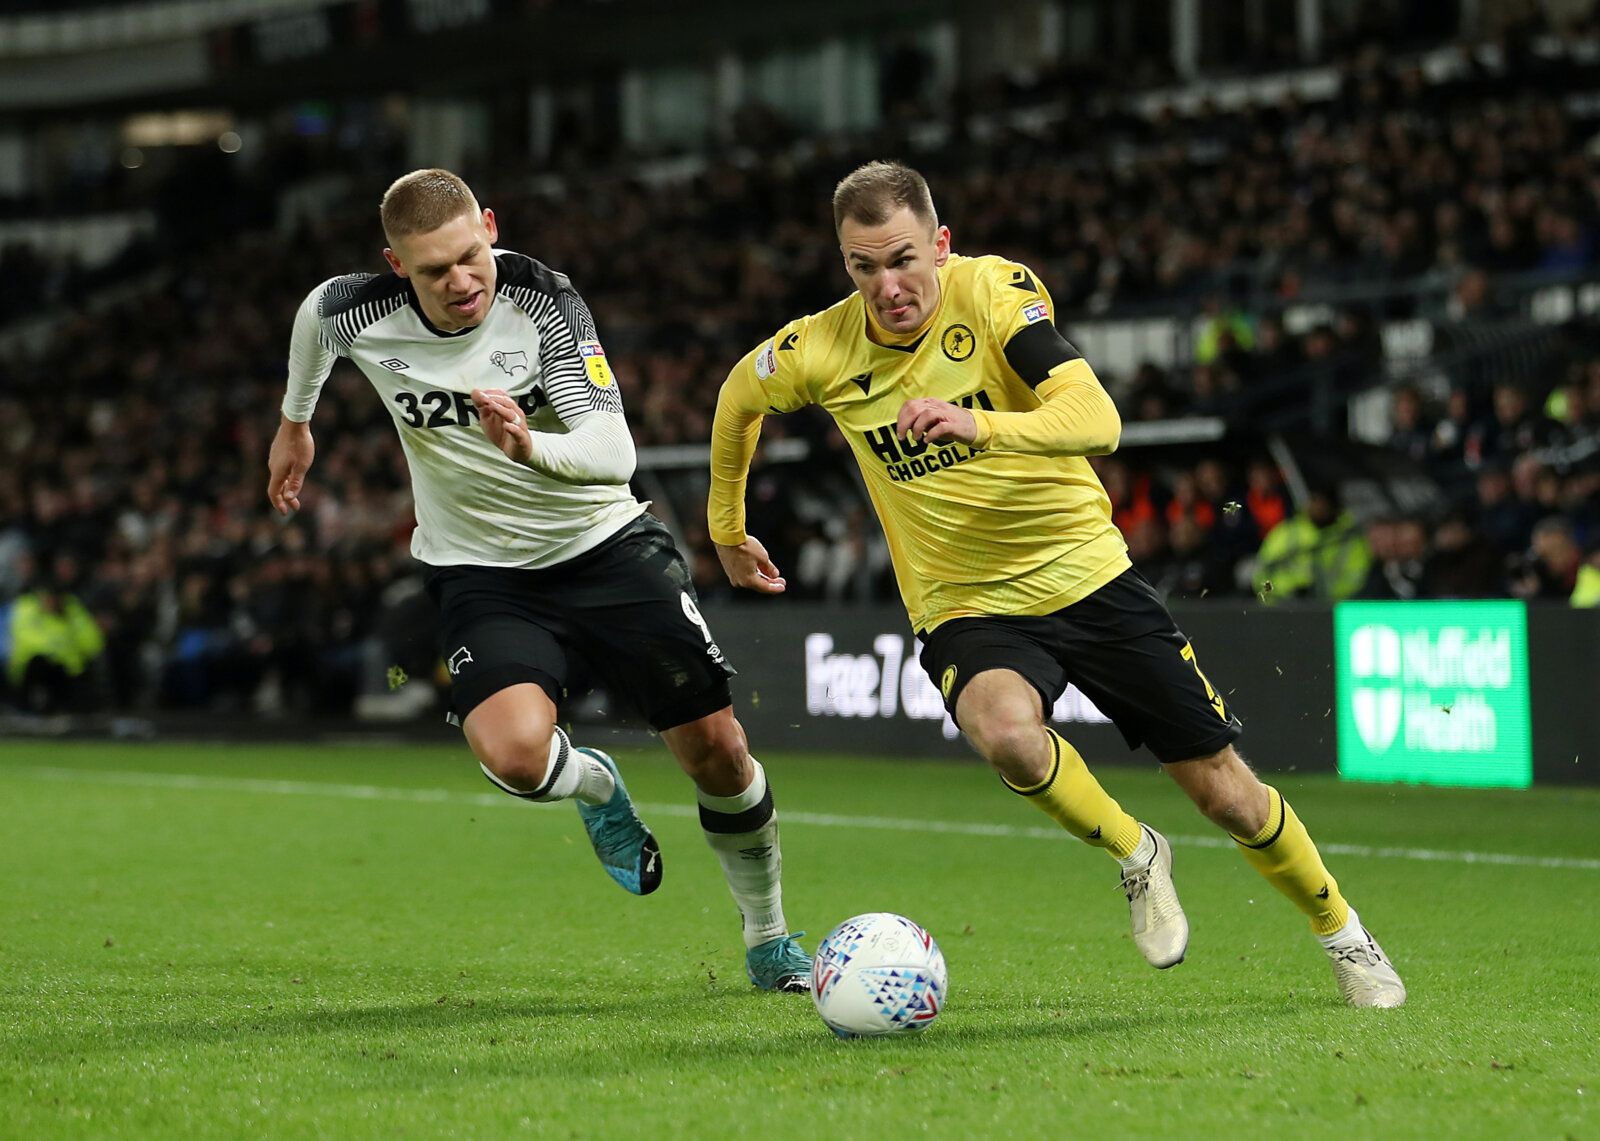 Soccer Football - Championship - Derby County v Millwall - Pride Park, Derby, Britain - December 14, 2019   Millwall's Jed Wallace in action with Derby County's Martyn Waghorn   Action Images/John Clifton    EDITORIAL USE ONLY. No use with unauthorized audio, video, data, fixture lists, club/league logos or 